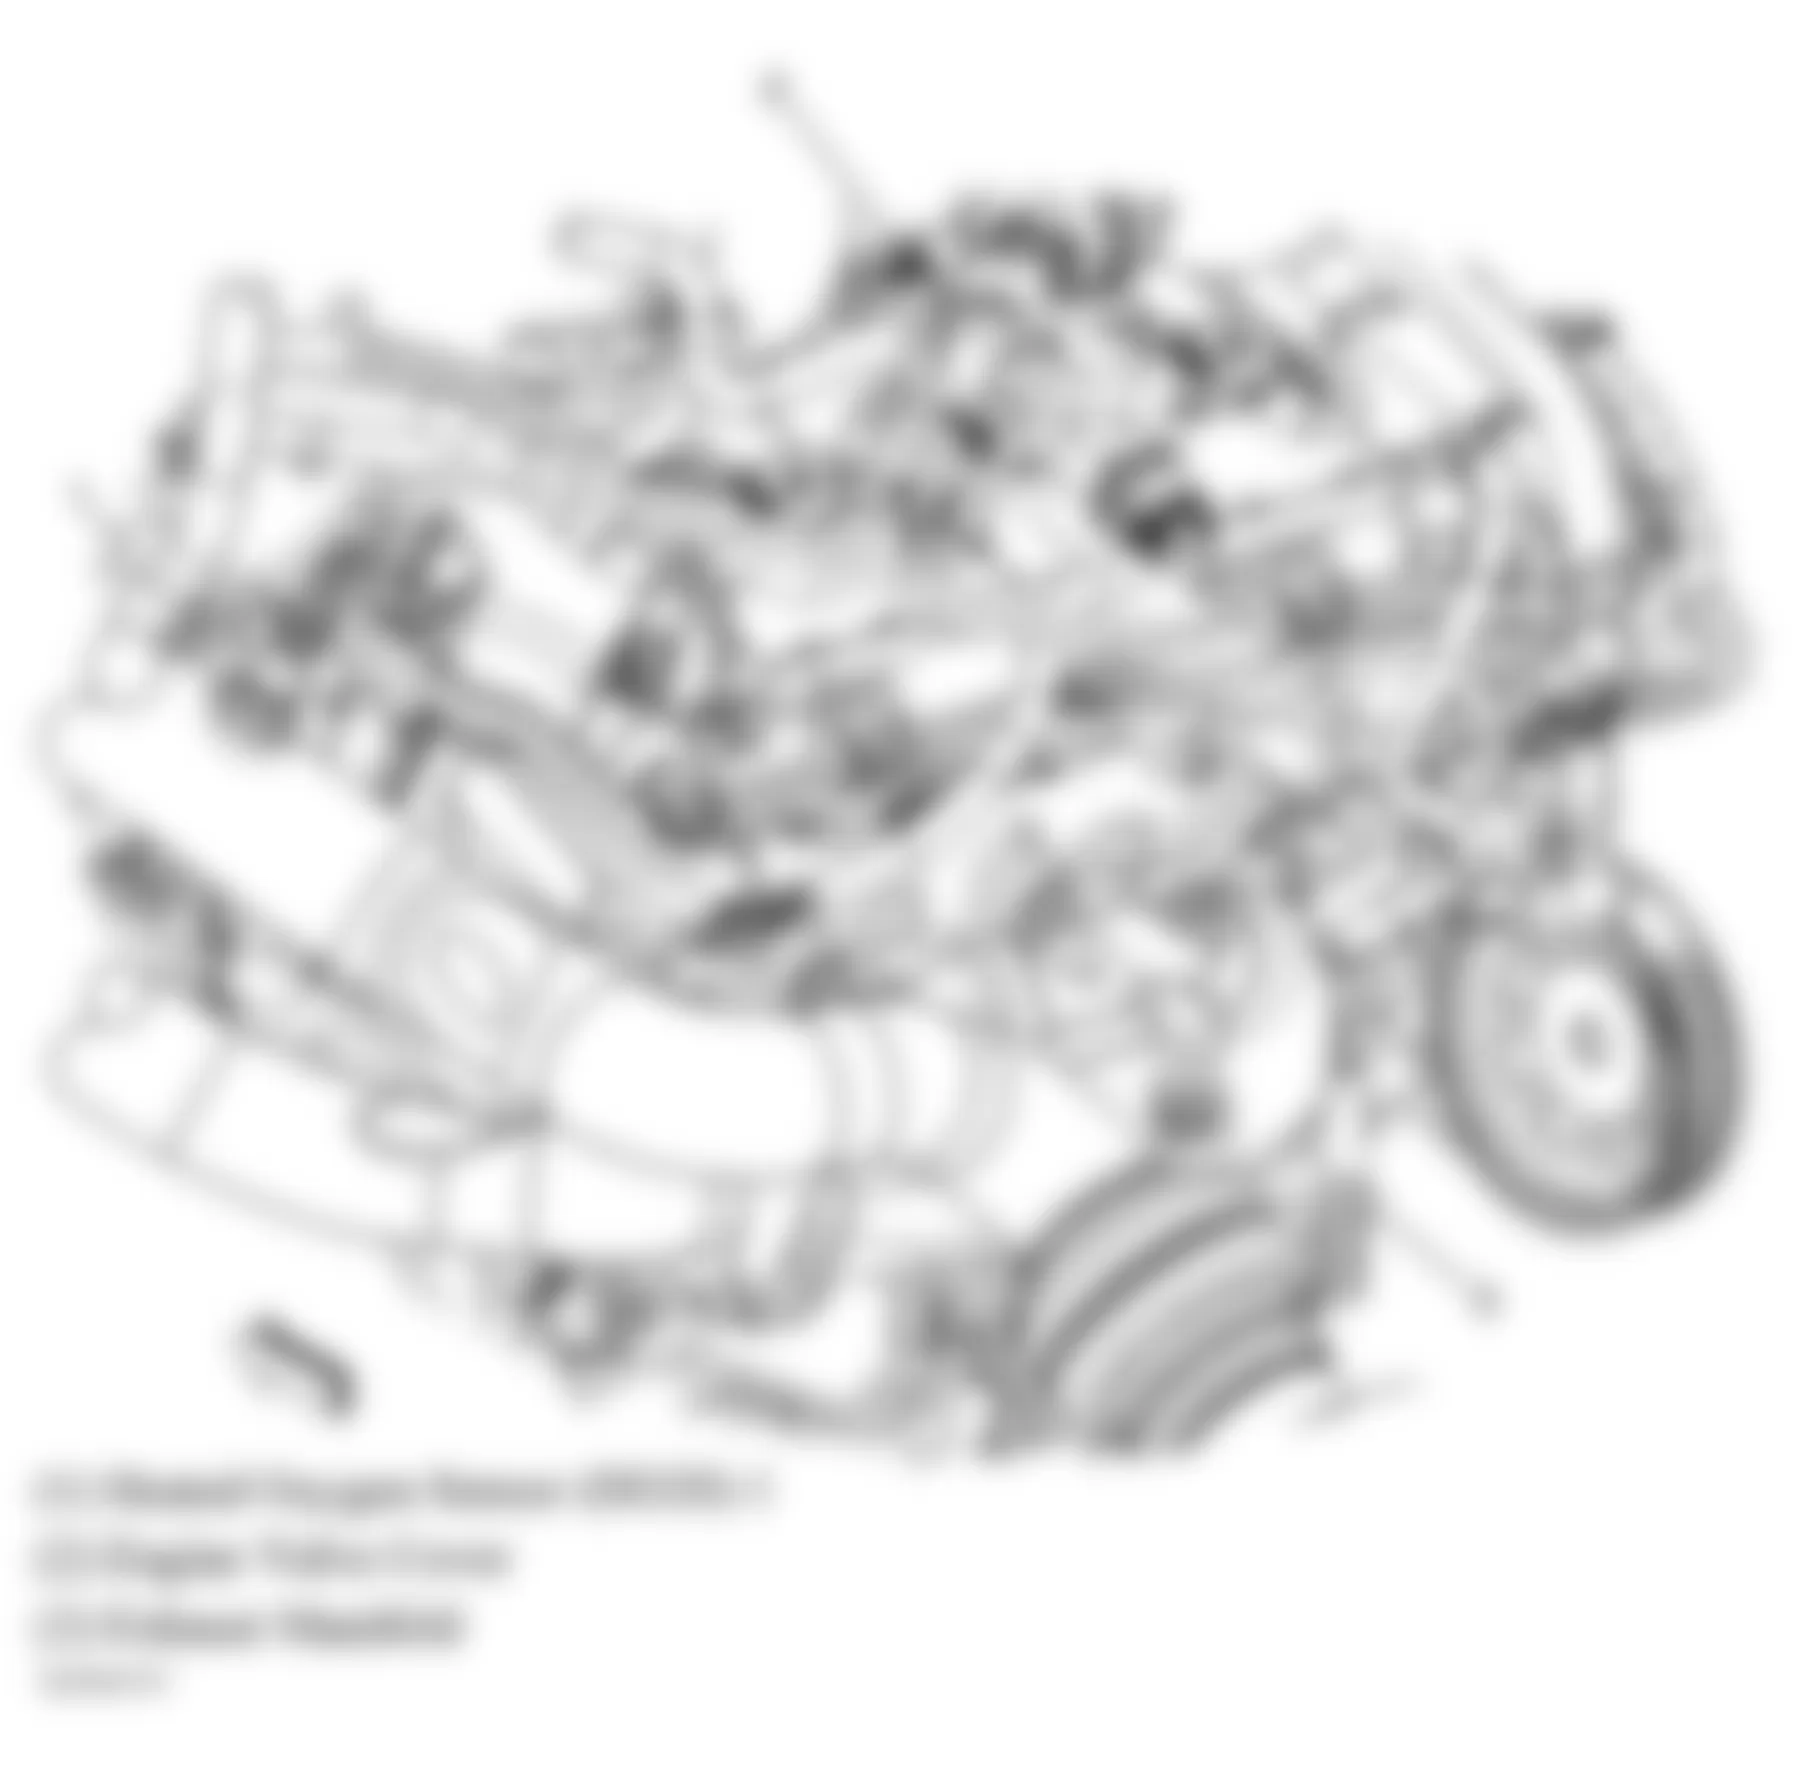 Buick LaCrosse CXL 2006 - Component Locations -  Right Rear Of Engine (3.6L)